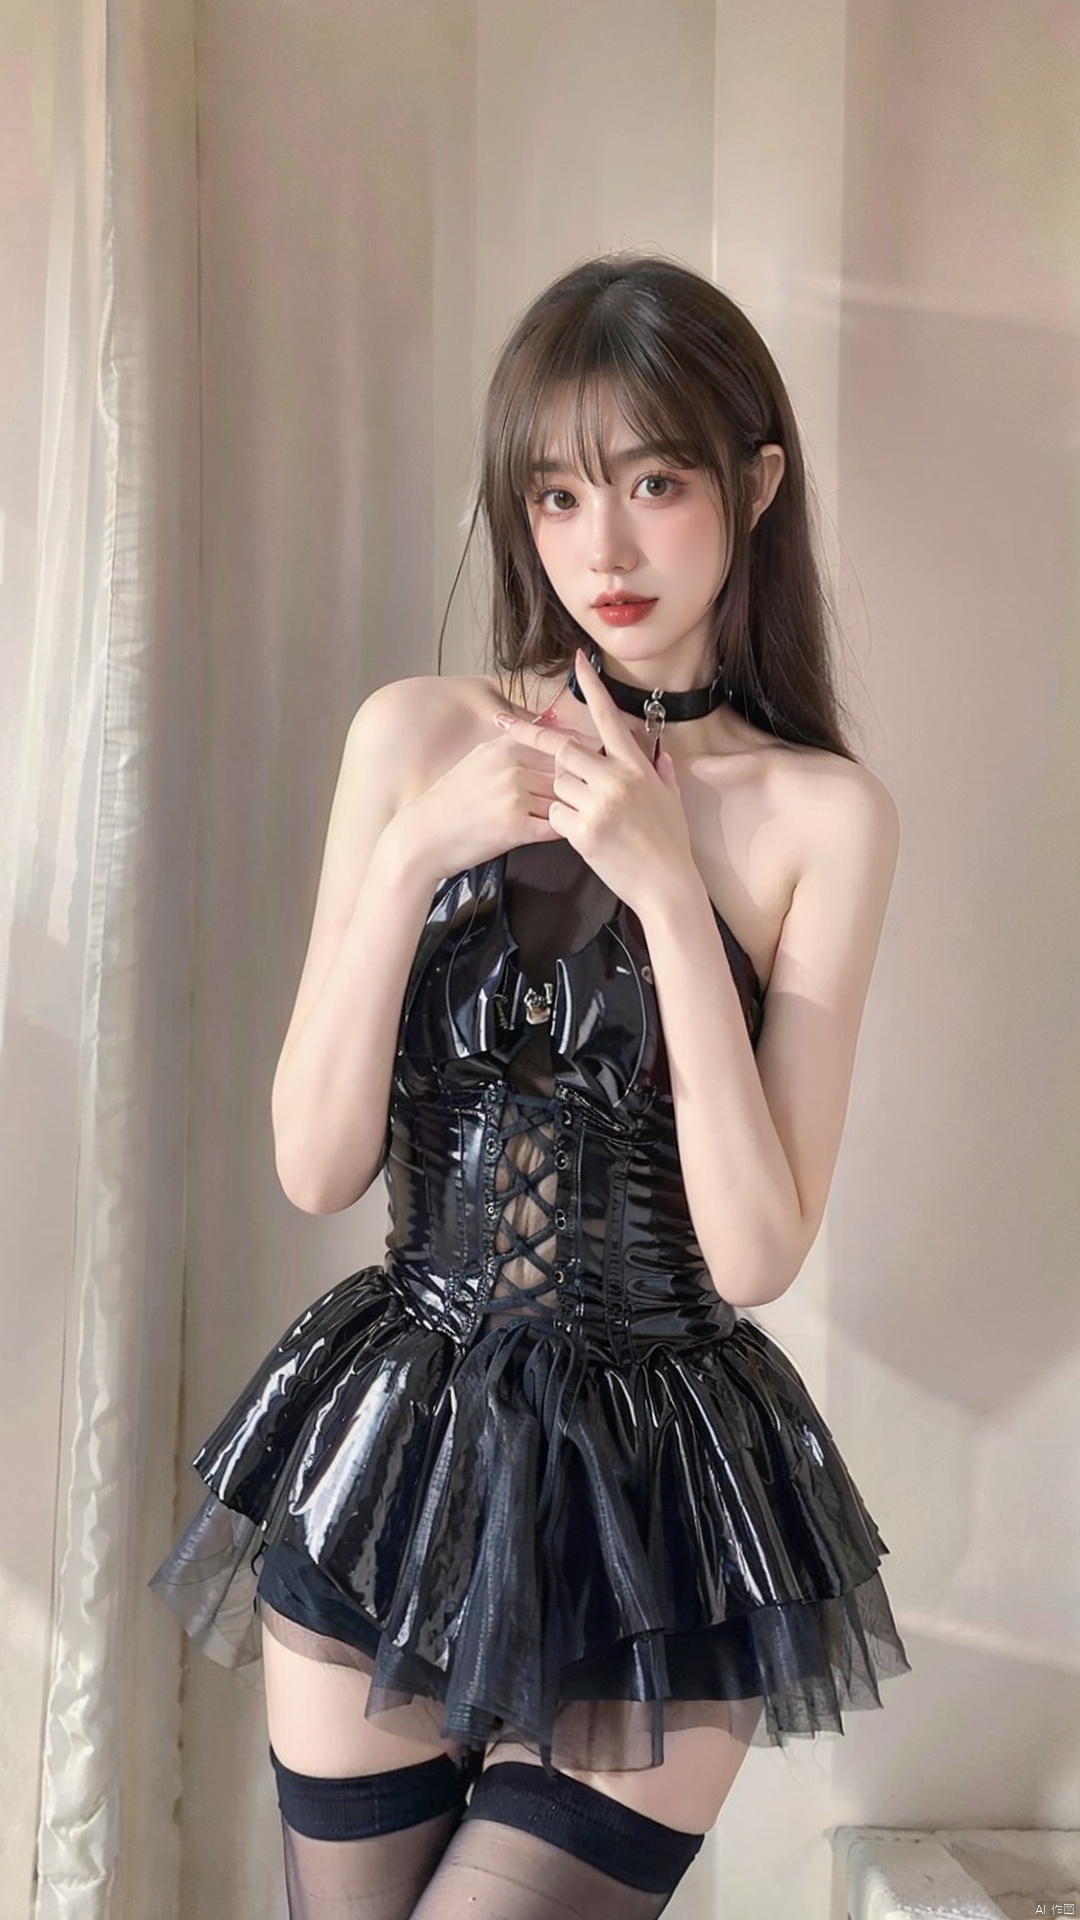  1GIR, (Masterpiece: 1.3), (Best Quality: 1.3), (Photorealistic: 1.4), Realistic, 4K, ((Blonde))), (Upper Body), NSFW, Milf, Detail Face, Detail Eyes, Indoor, Bedroom, Big Breasts, (Black Dress, Thigh High)), ((Short Skirt)), Patent Leather Dress